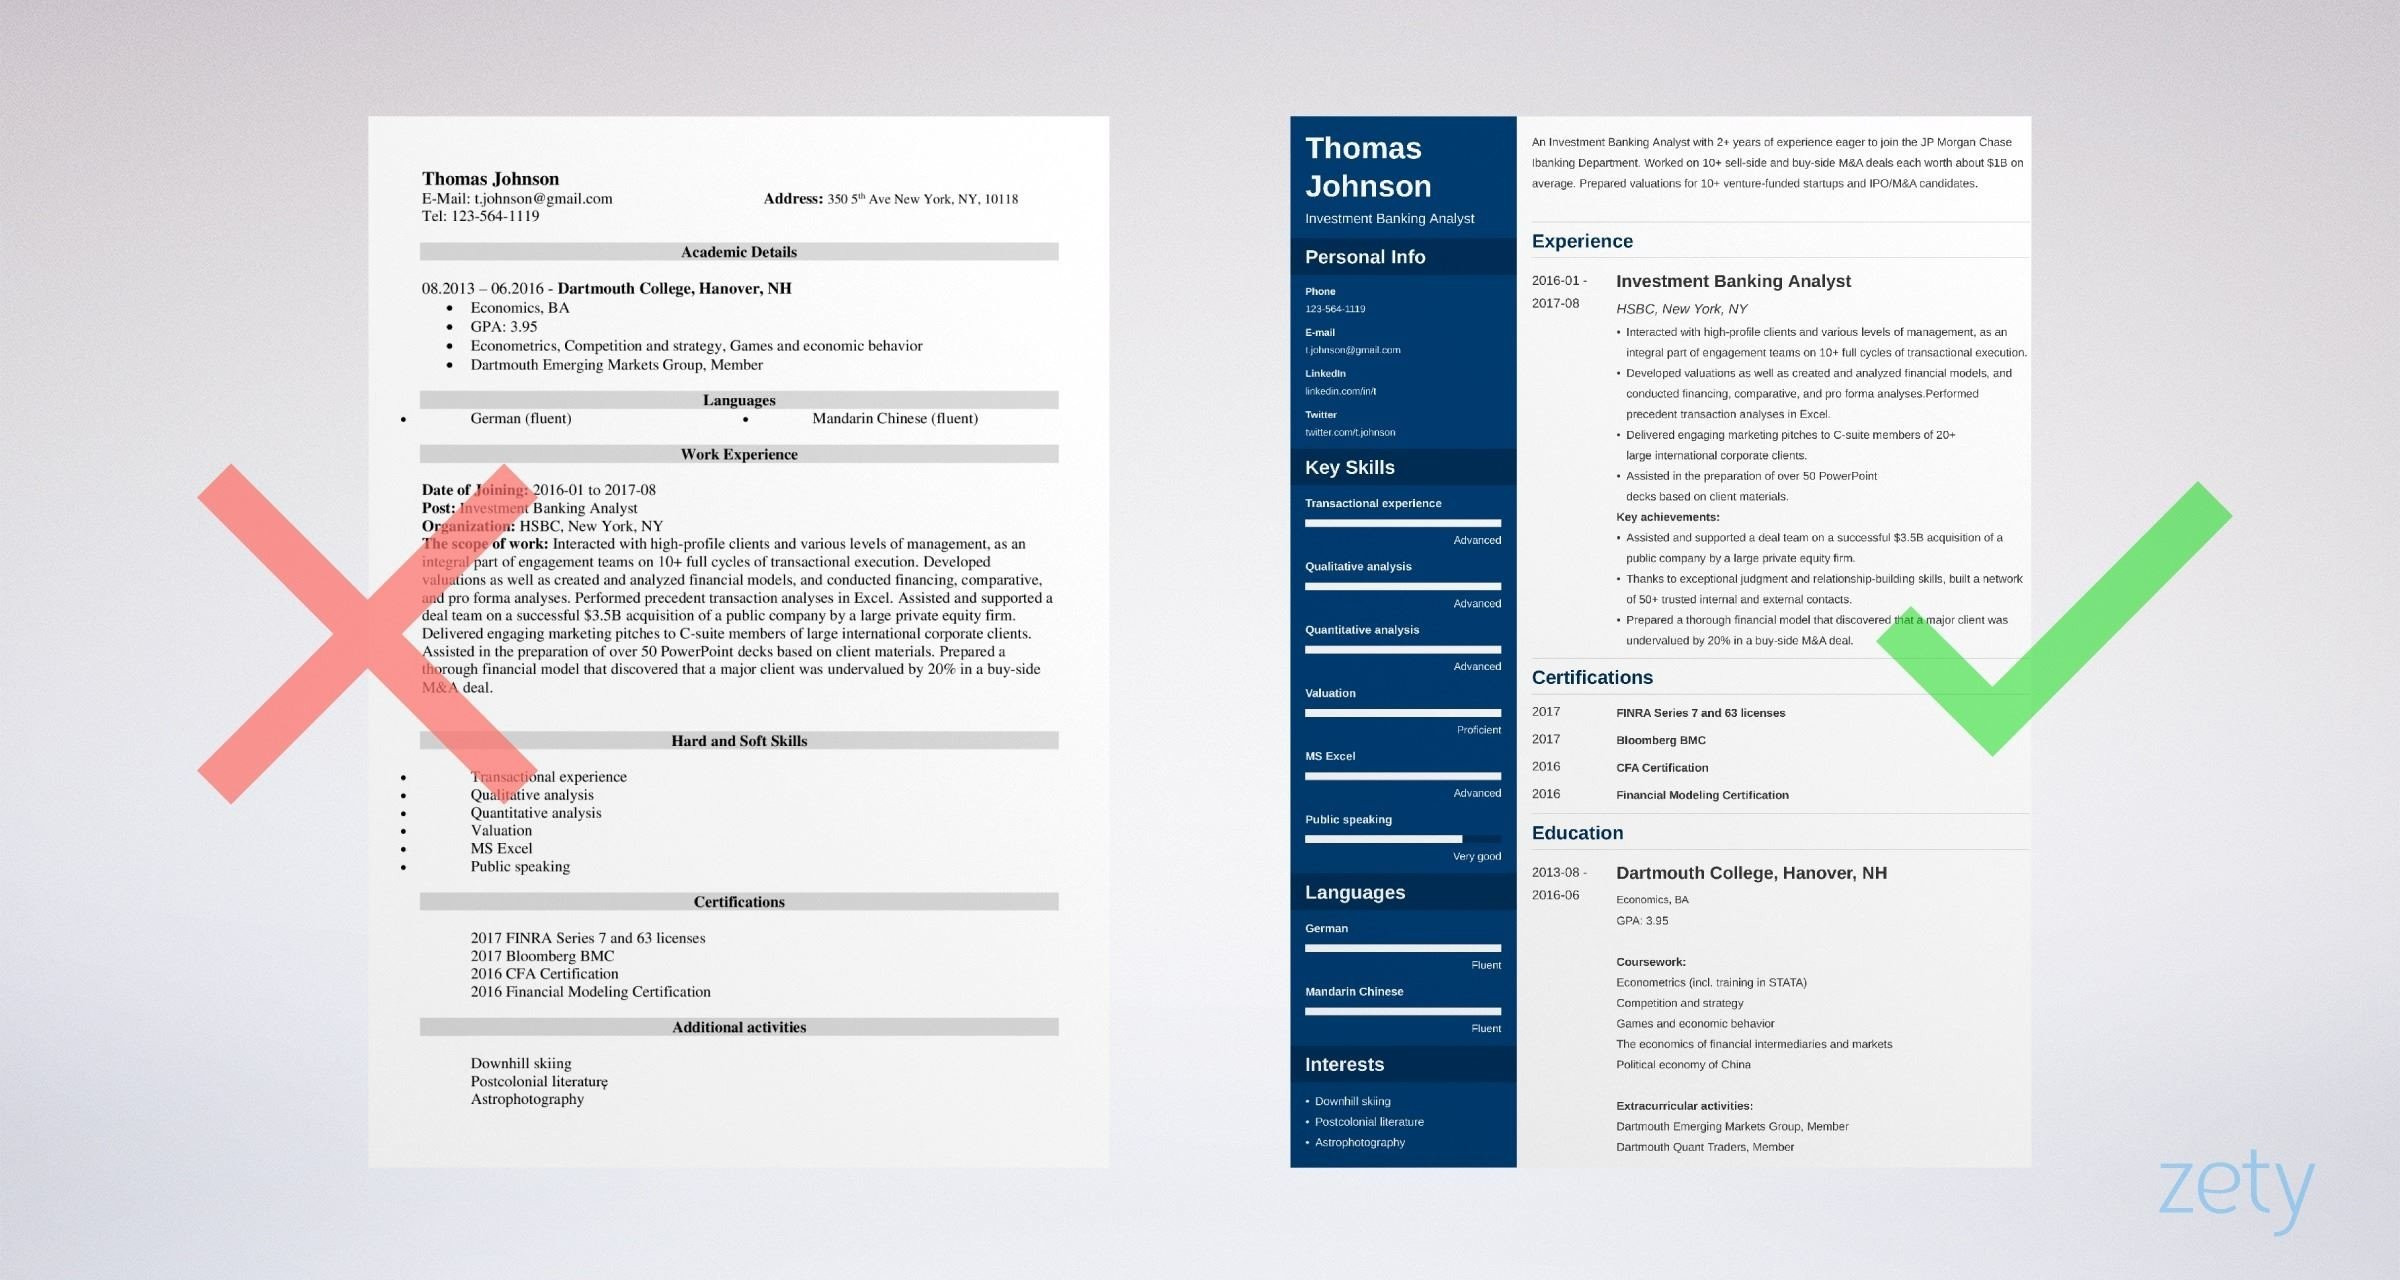 Sample Resume for Investment Banking Analyst Investment Banking Resume Template & Guide [20 Examples]